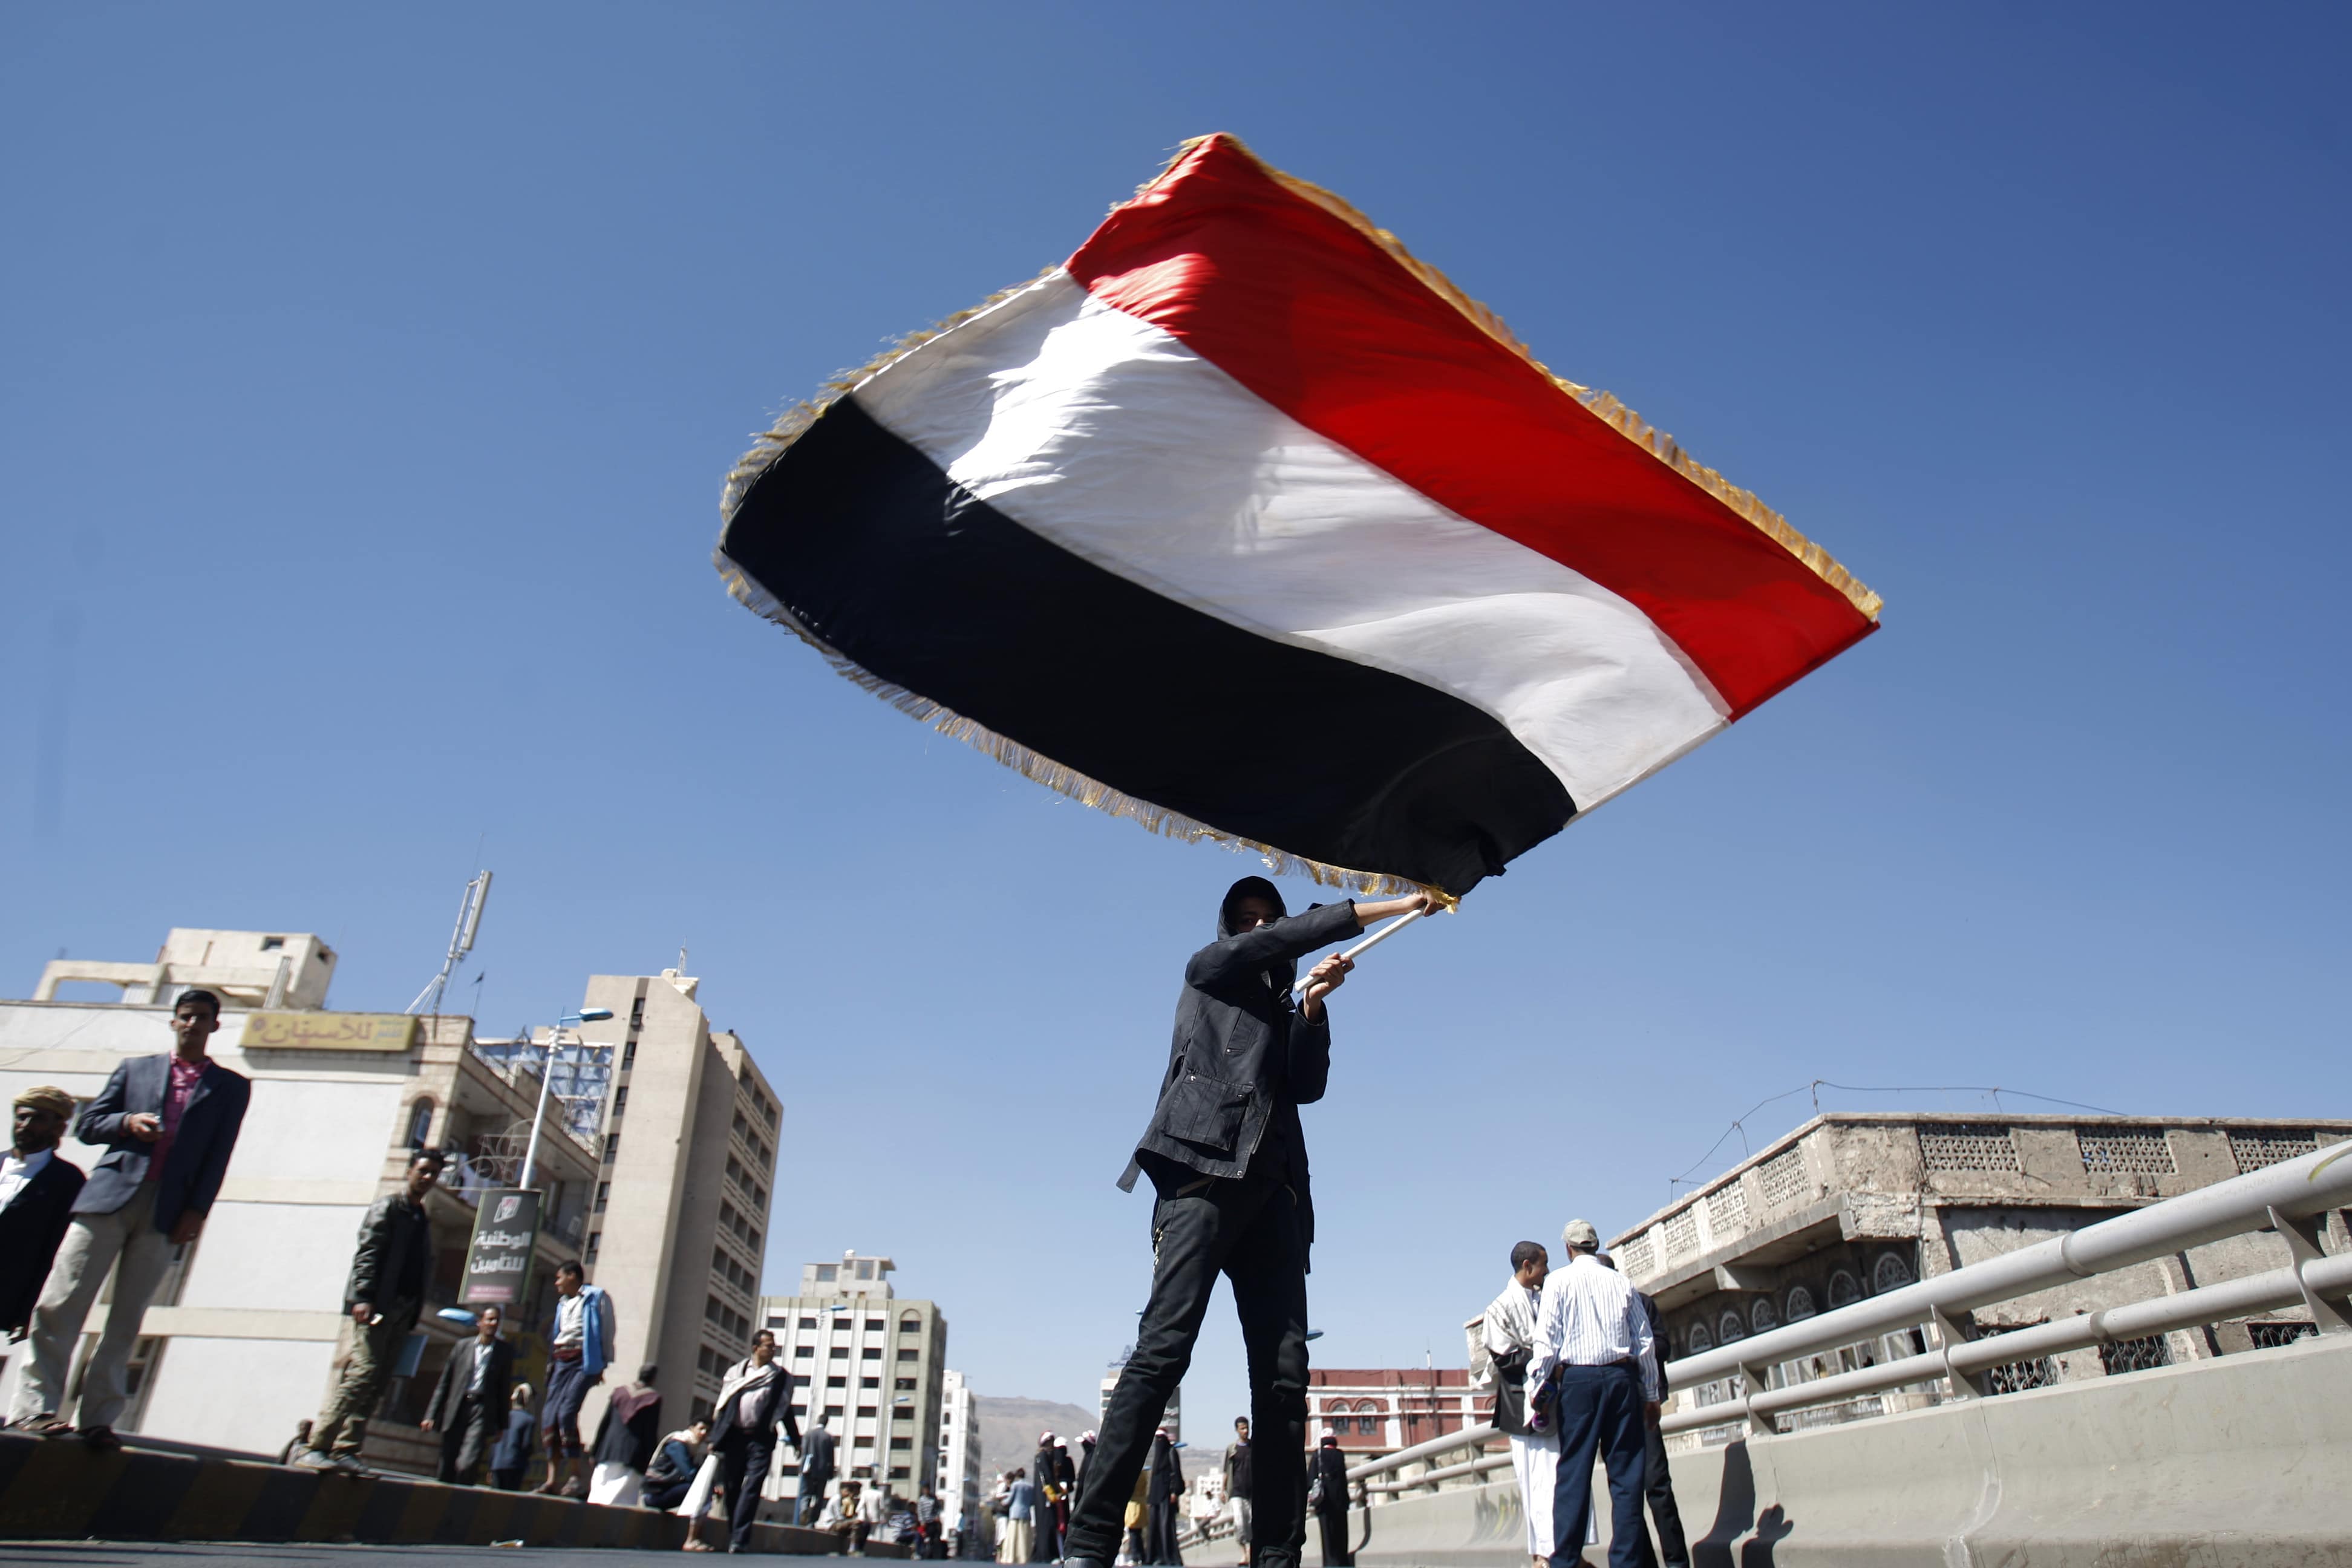 A Yemeni protester waves his national flag during a demonstration, AP Photo/Hani Mohammed